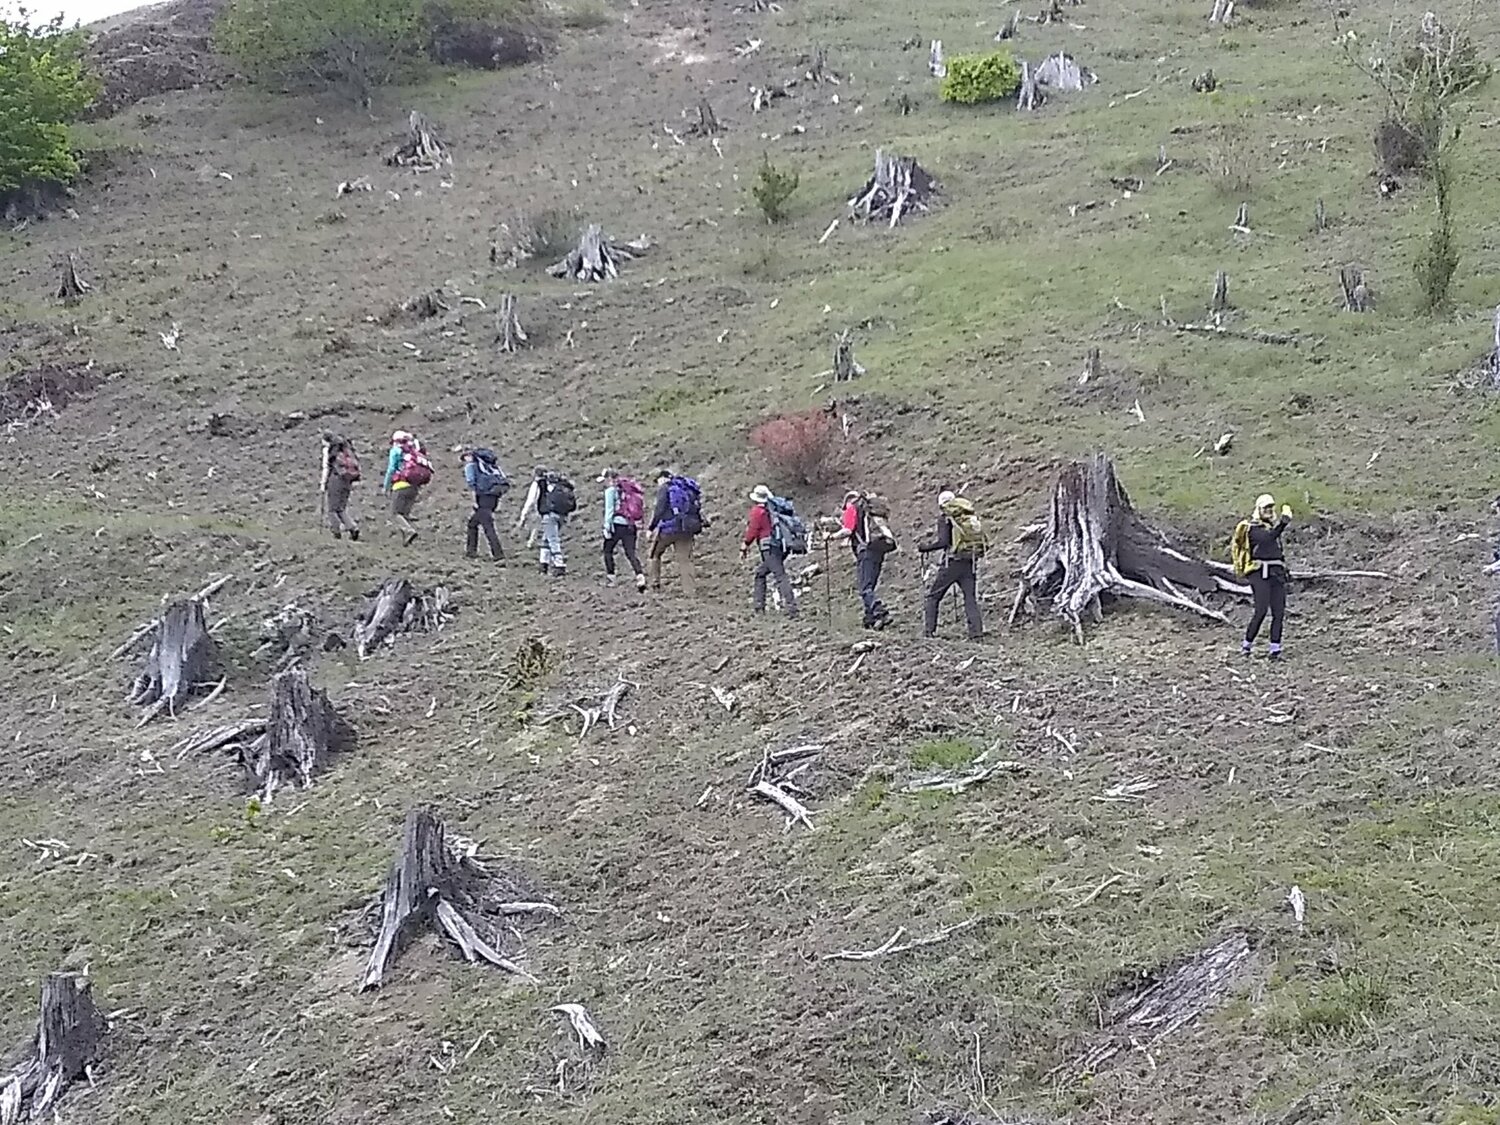 Volunteers hike to the Johnston Ridge Observatory on May 24 to retrieve equipment after a landslide earlier this month cut off access to the site.